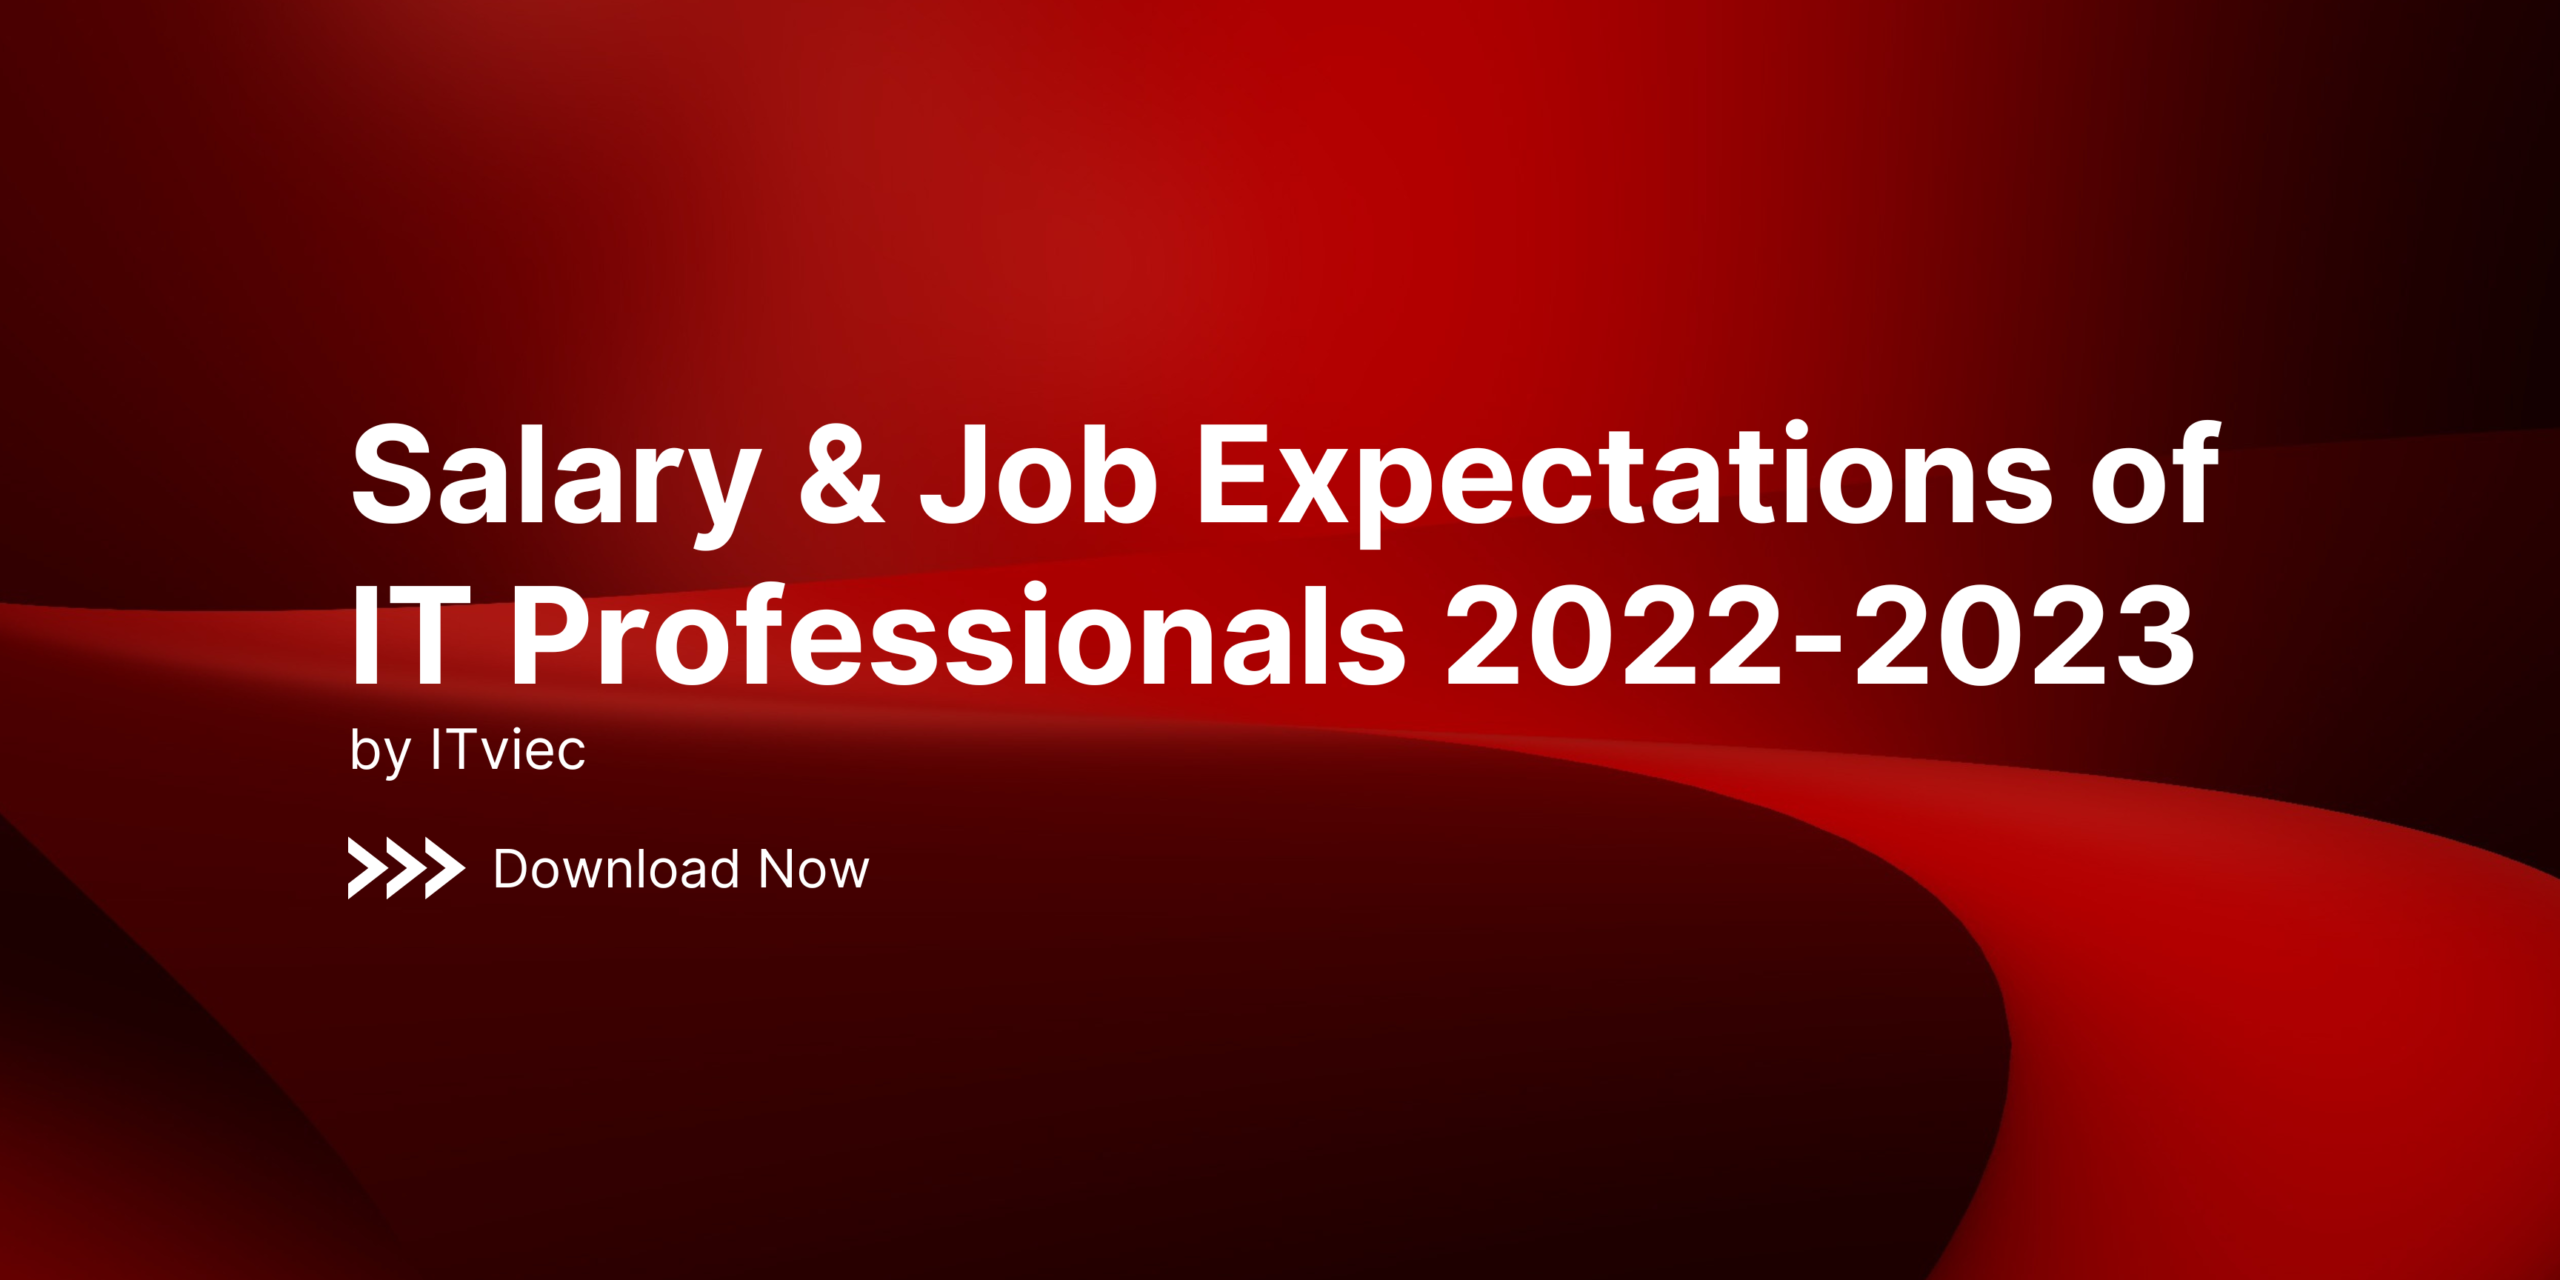 Salary & Job Expectations of IT Professionals 2022-2023